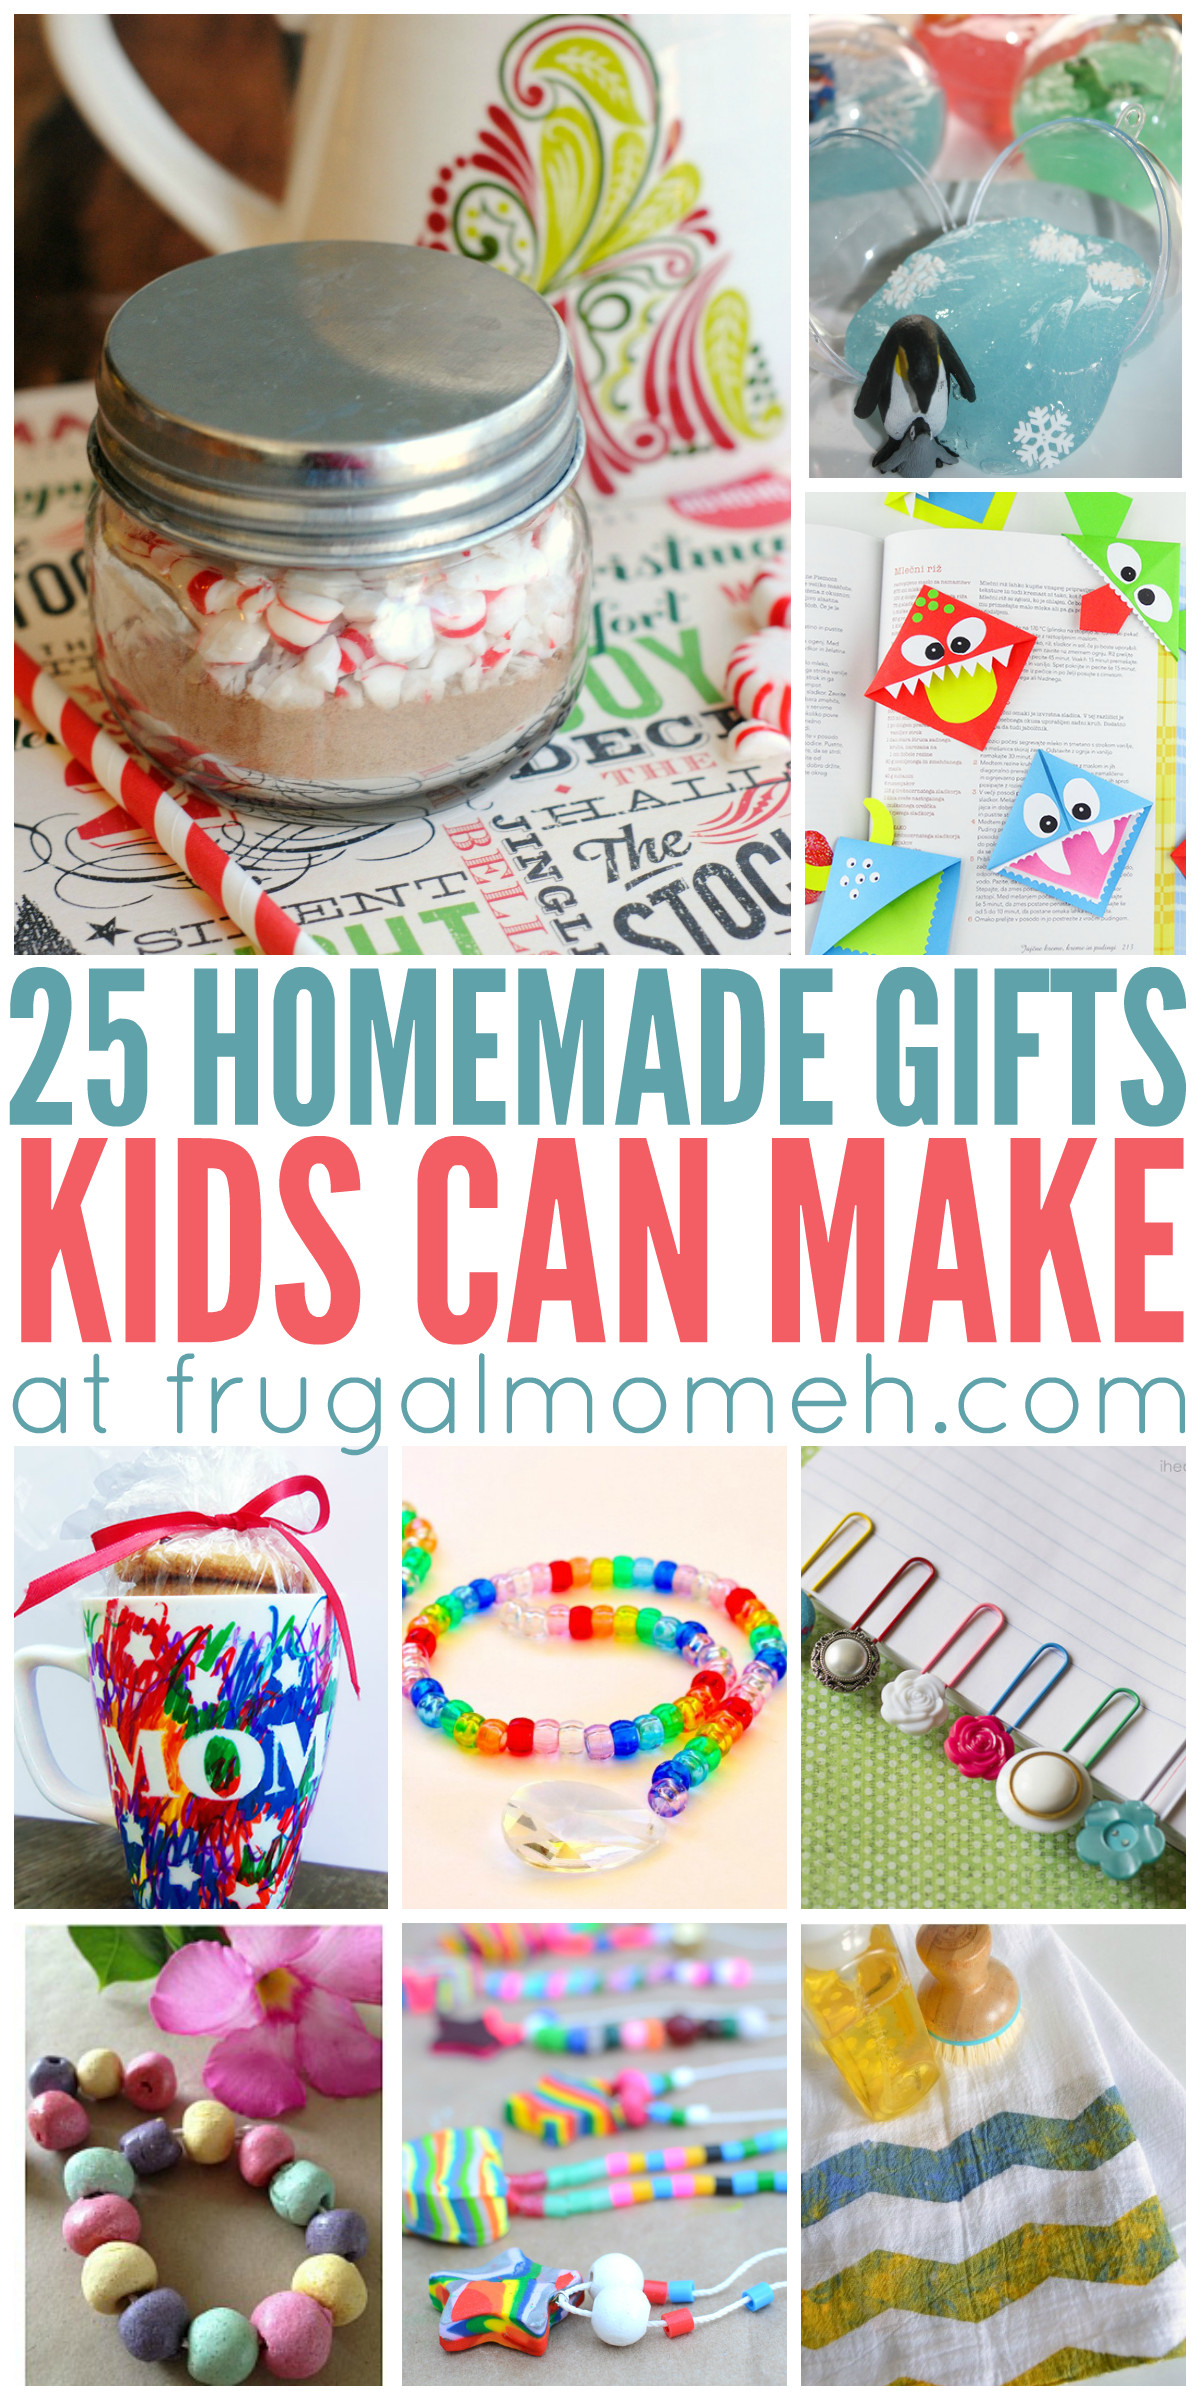 Homemade Christmas Gifts Kids Can Make
 Homemade Gifts That Kids Can Make